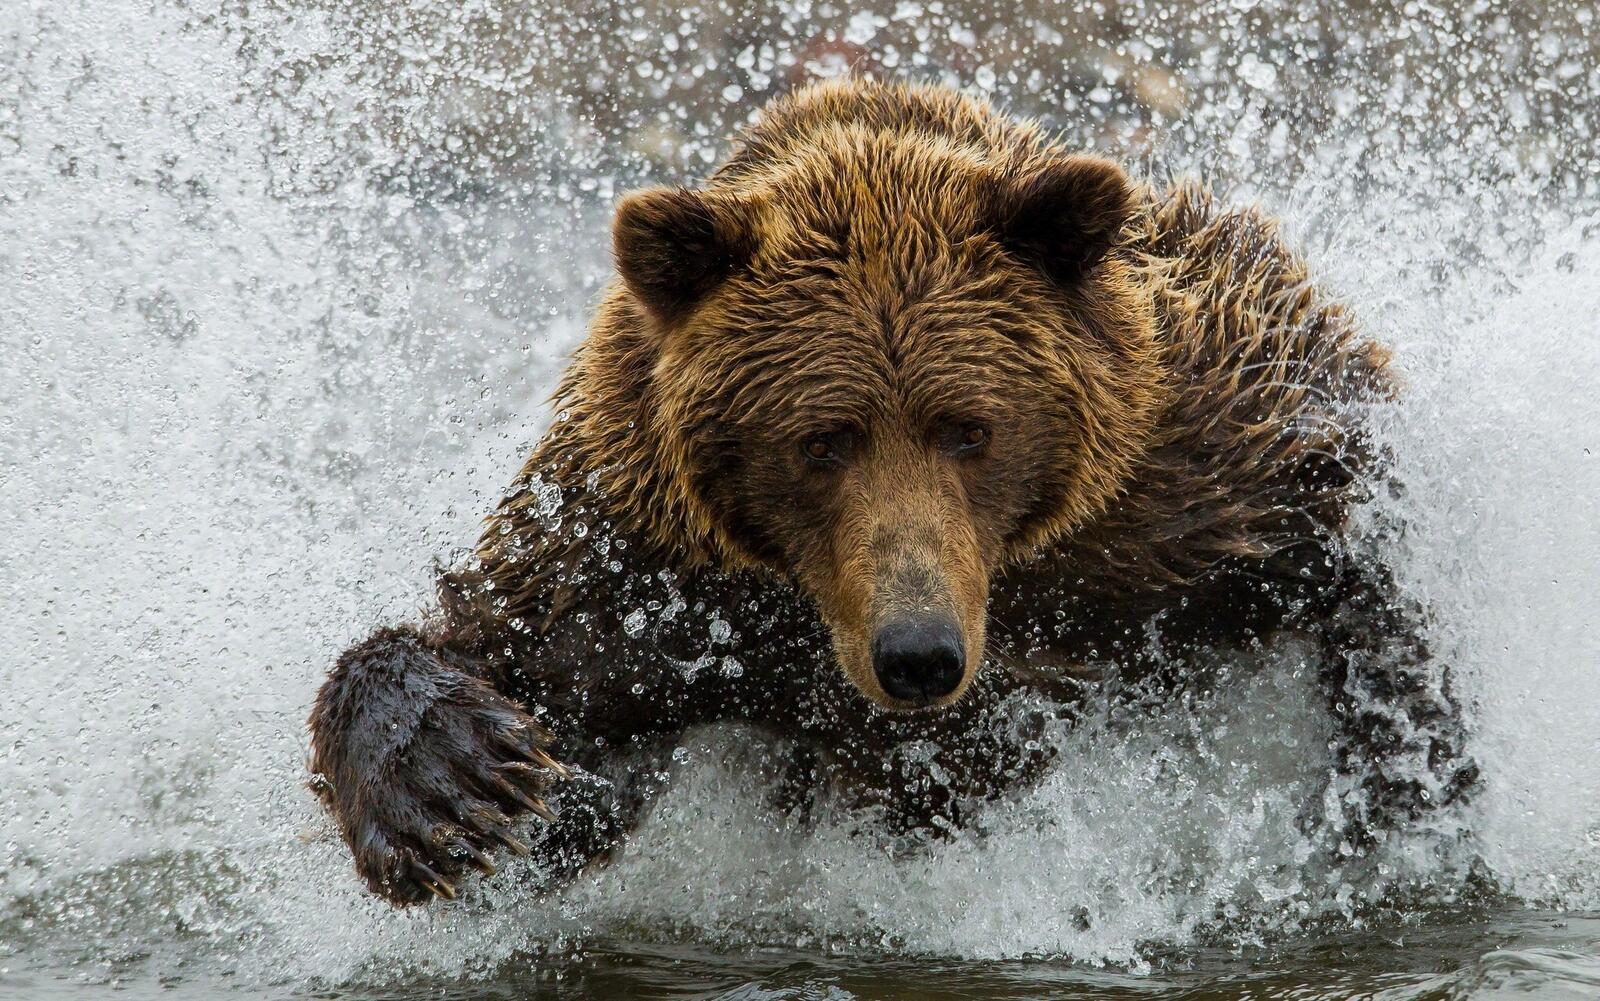 A bear is fishing in the river